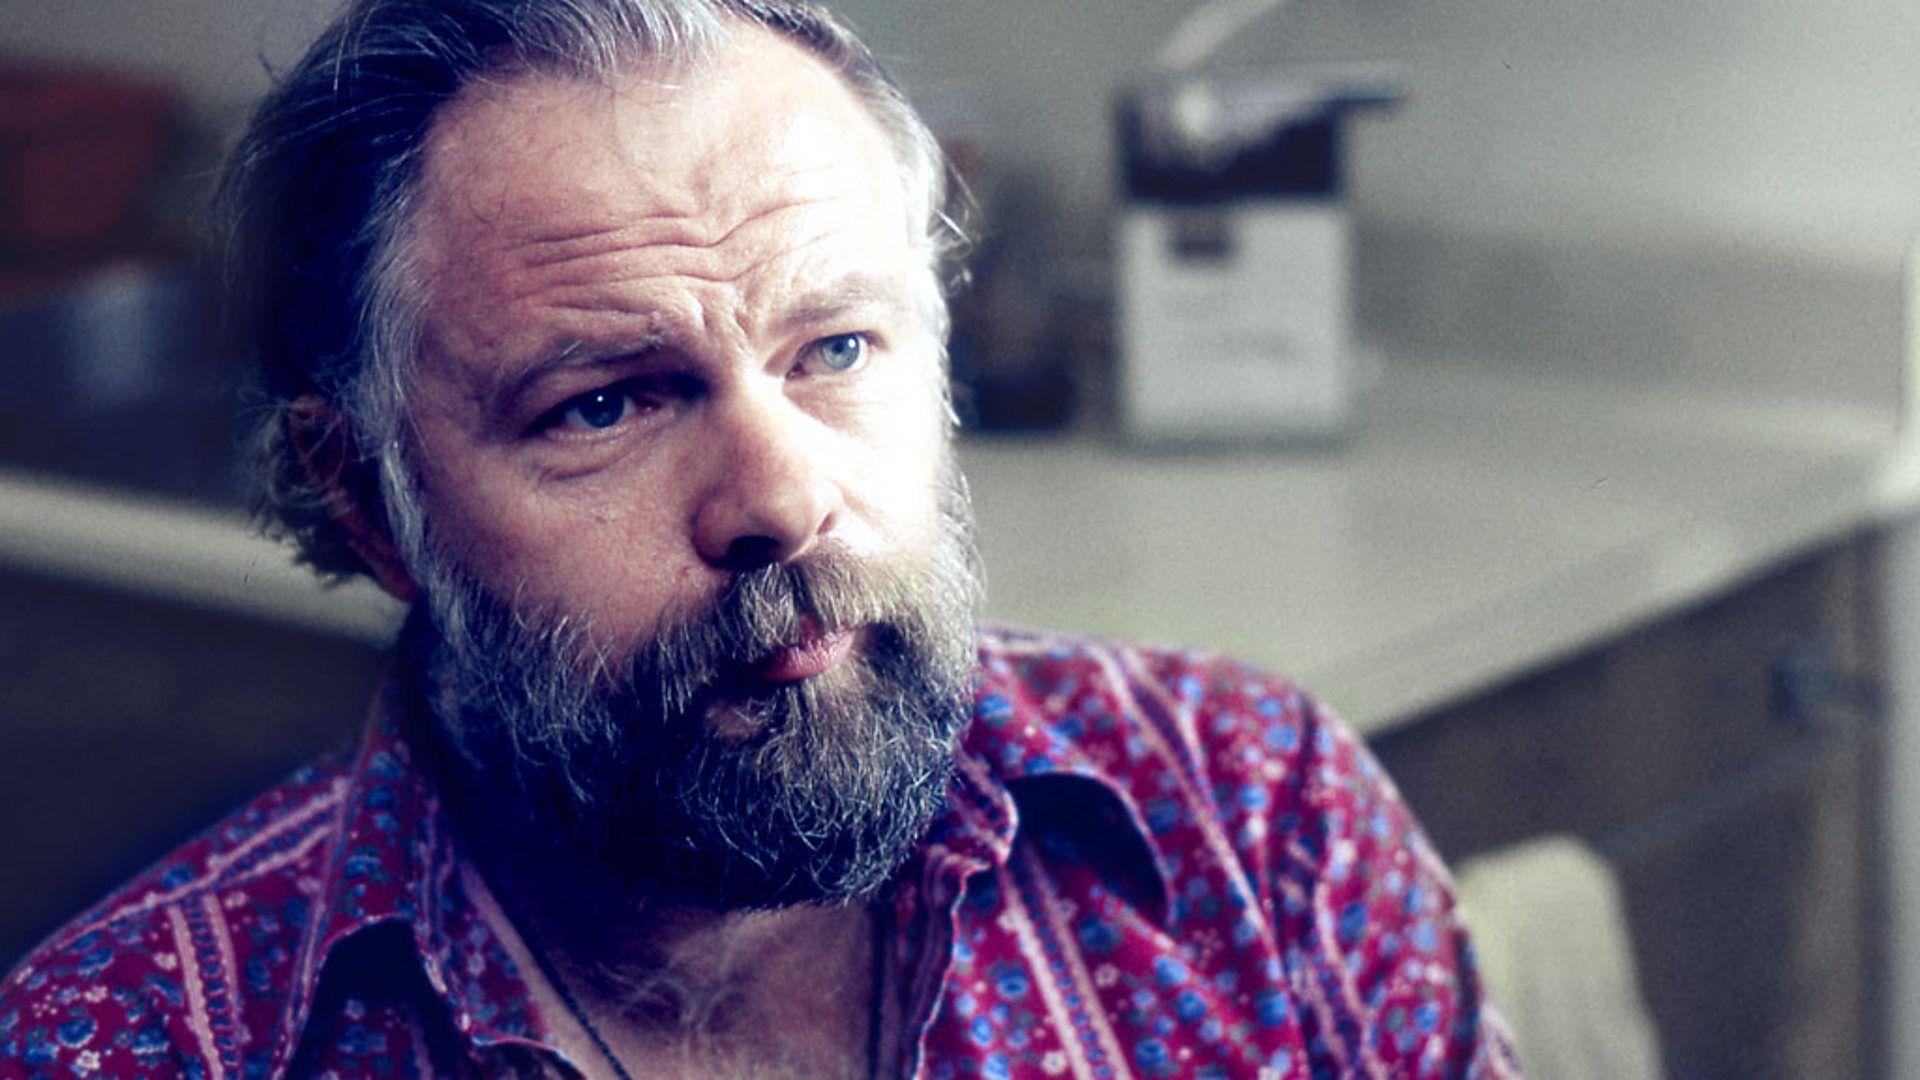 Philip K. Dick's Electric Dreams Anthology Series Coming to Amazon